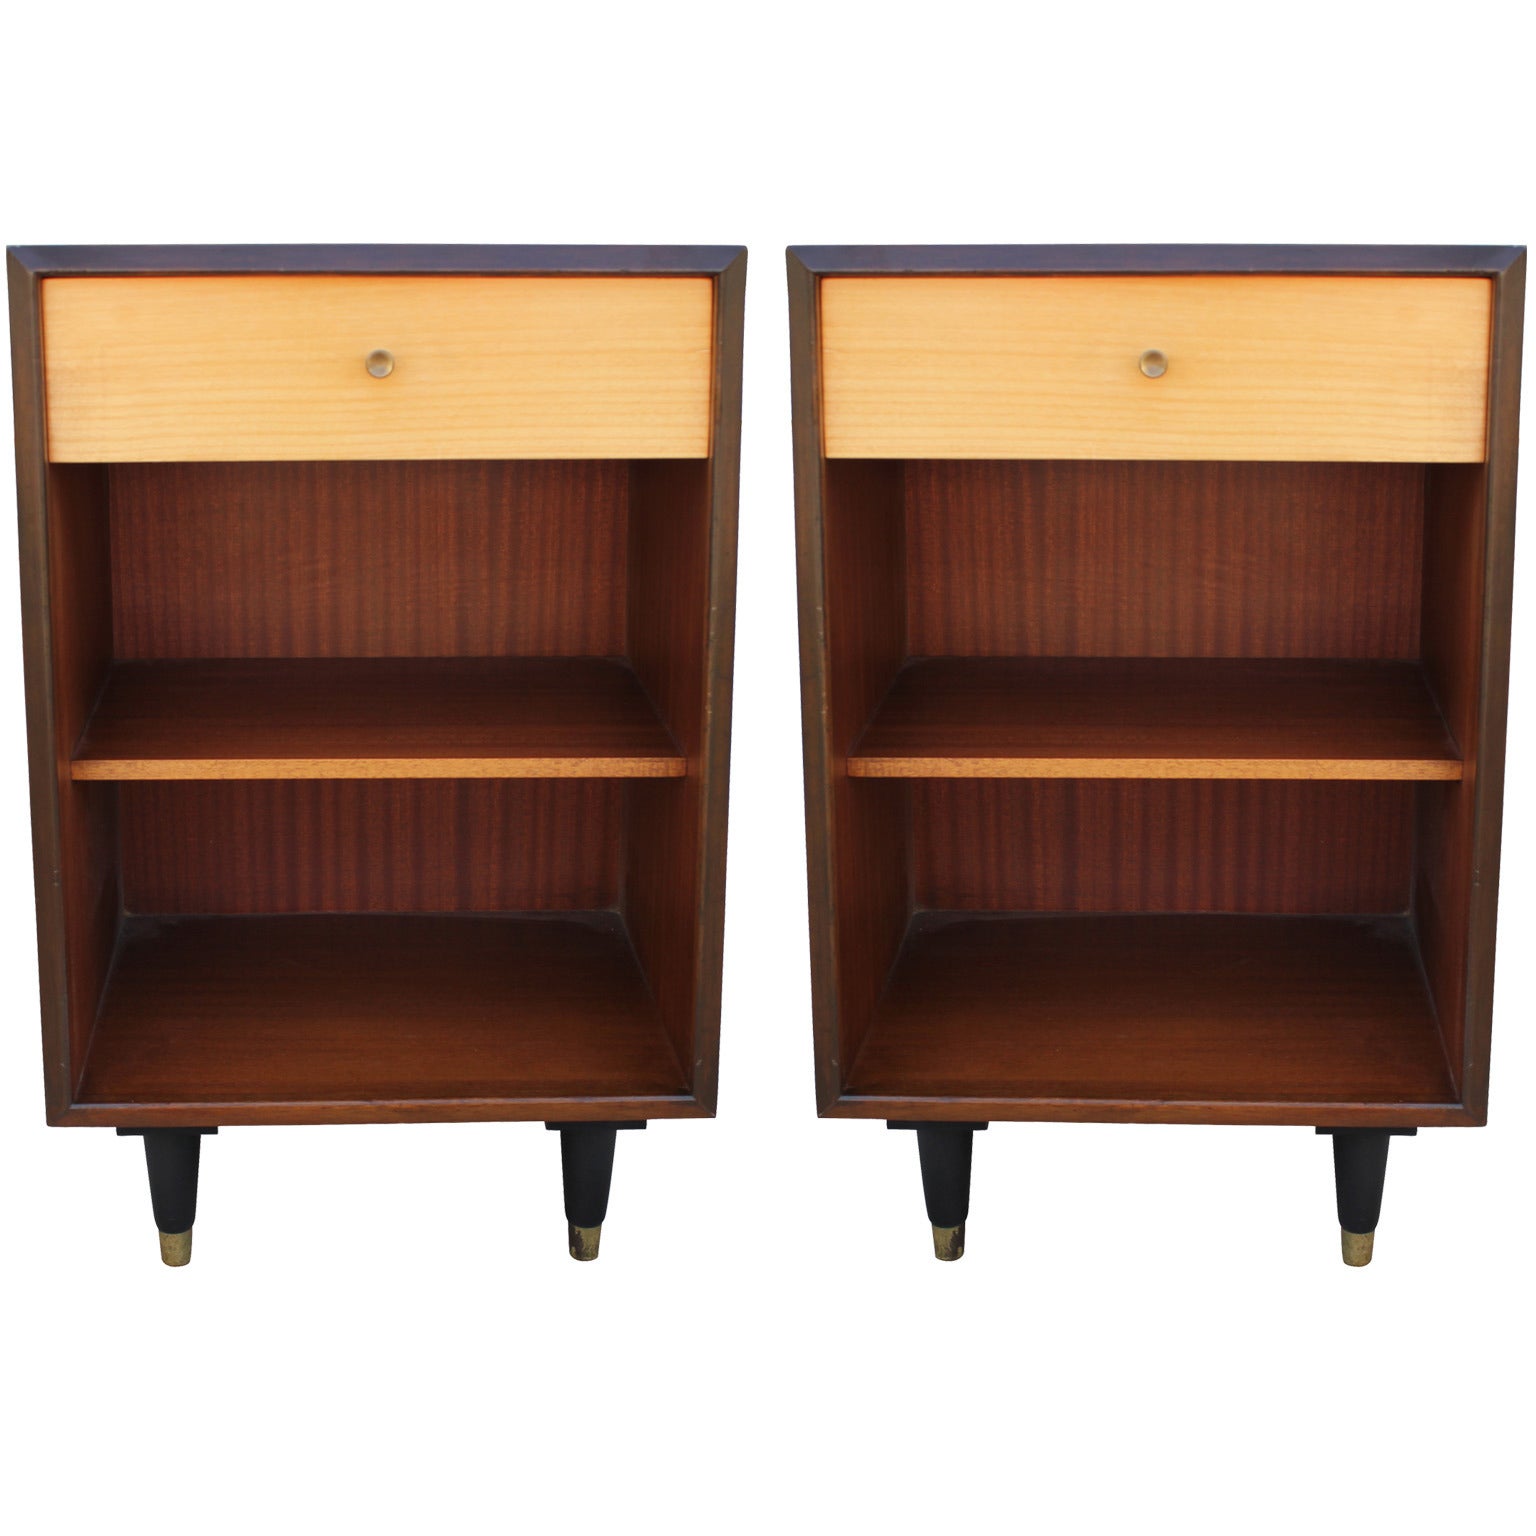 Pair of Two-Tone Nightstands